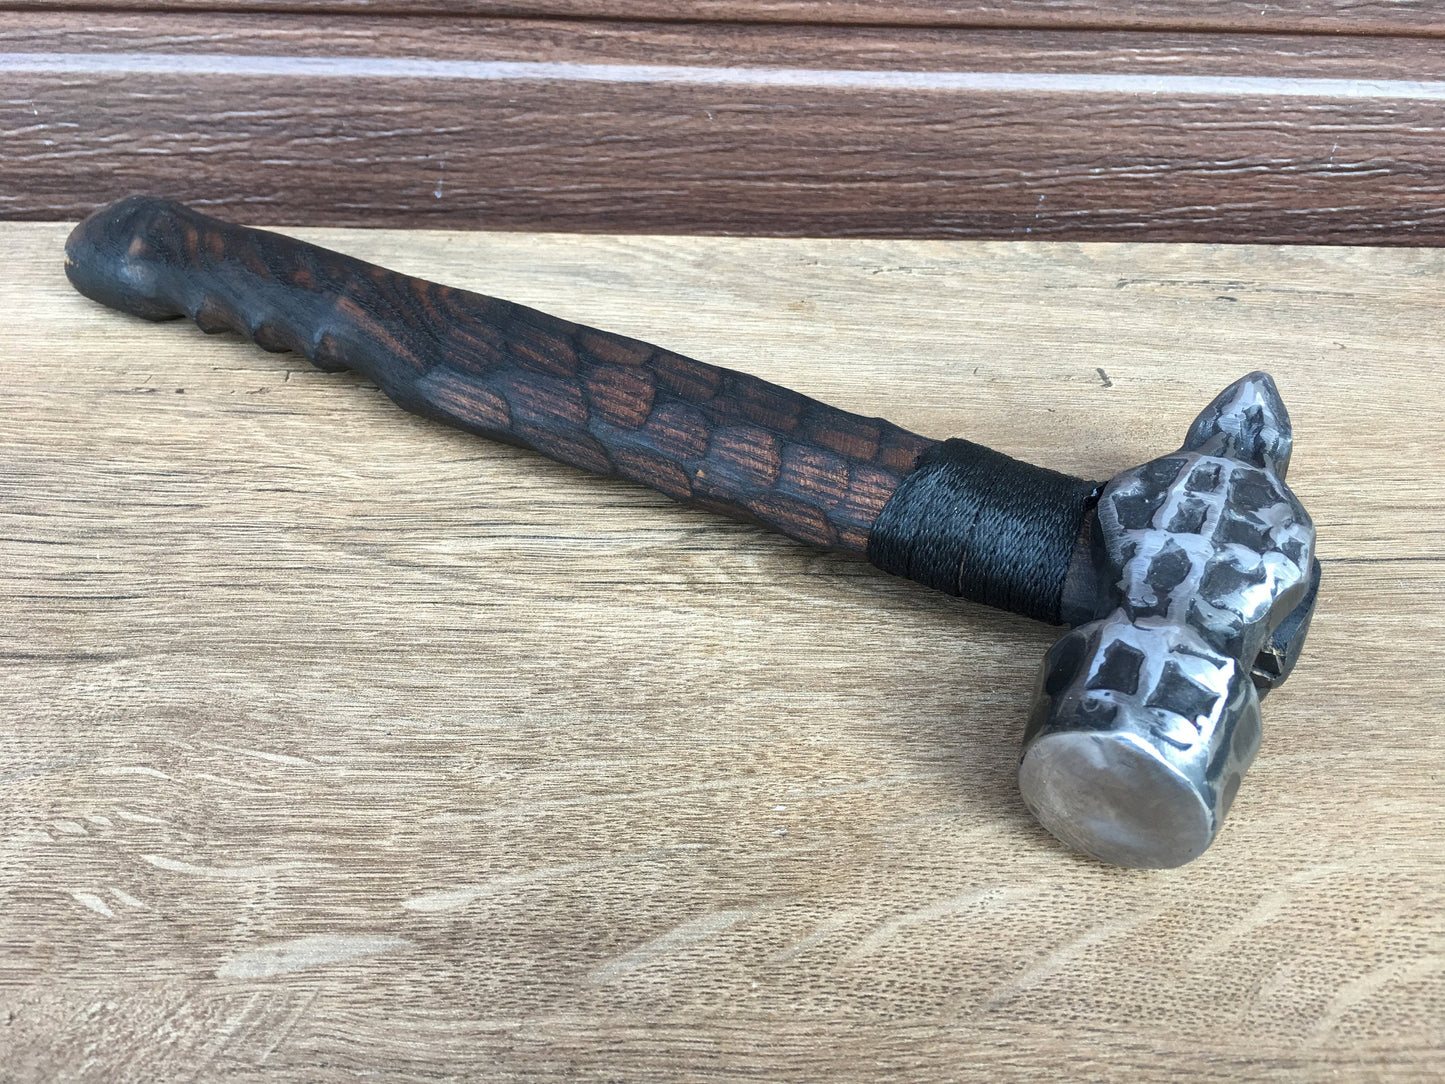 Mens gift, hand crafted hammer, handyman tool, viking hammer, mens birthday gift, mens best gift, iron gift for him, gift for Dad, Christmas